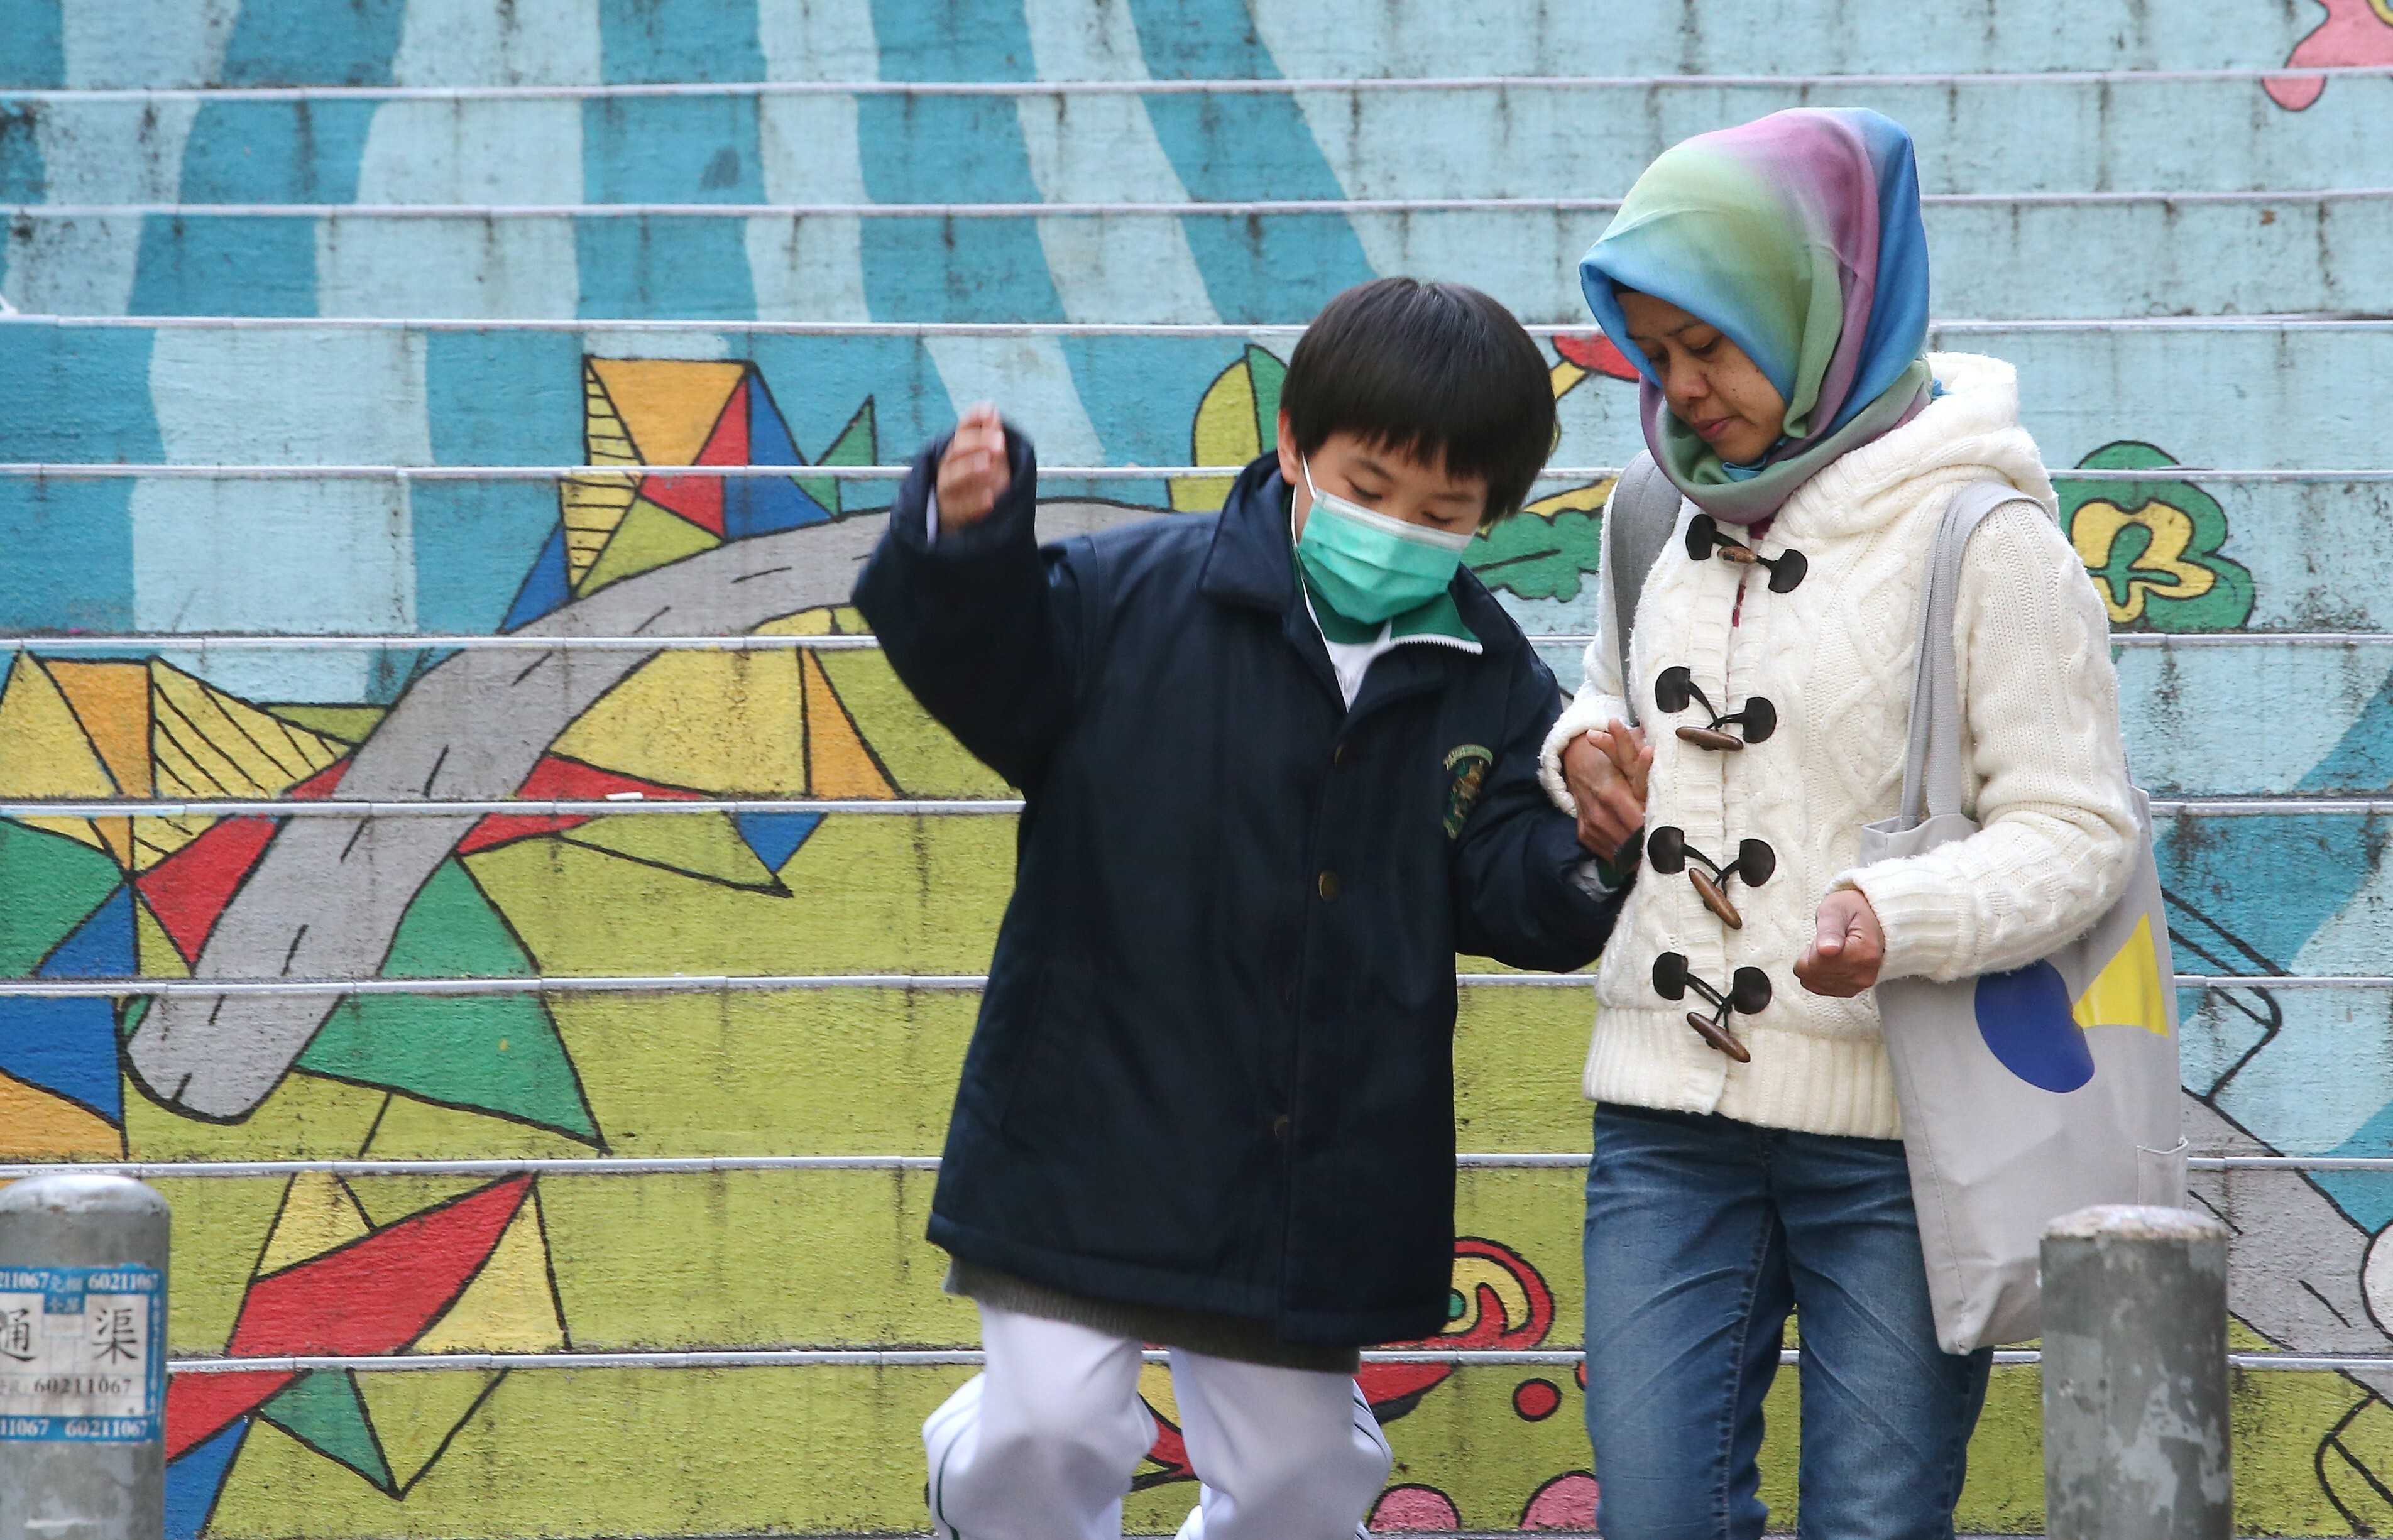 A domestic helper walks with a child in her care in February 2018. Given the limited care options for children in Hong Kong, many families rely on migrant workers to help look after their children at home. Photo: David Wong